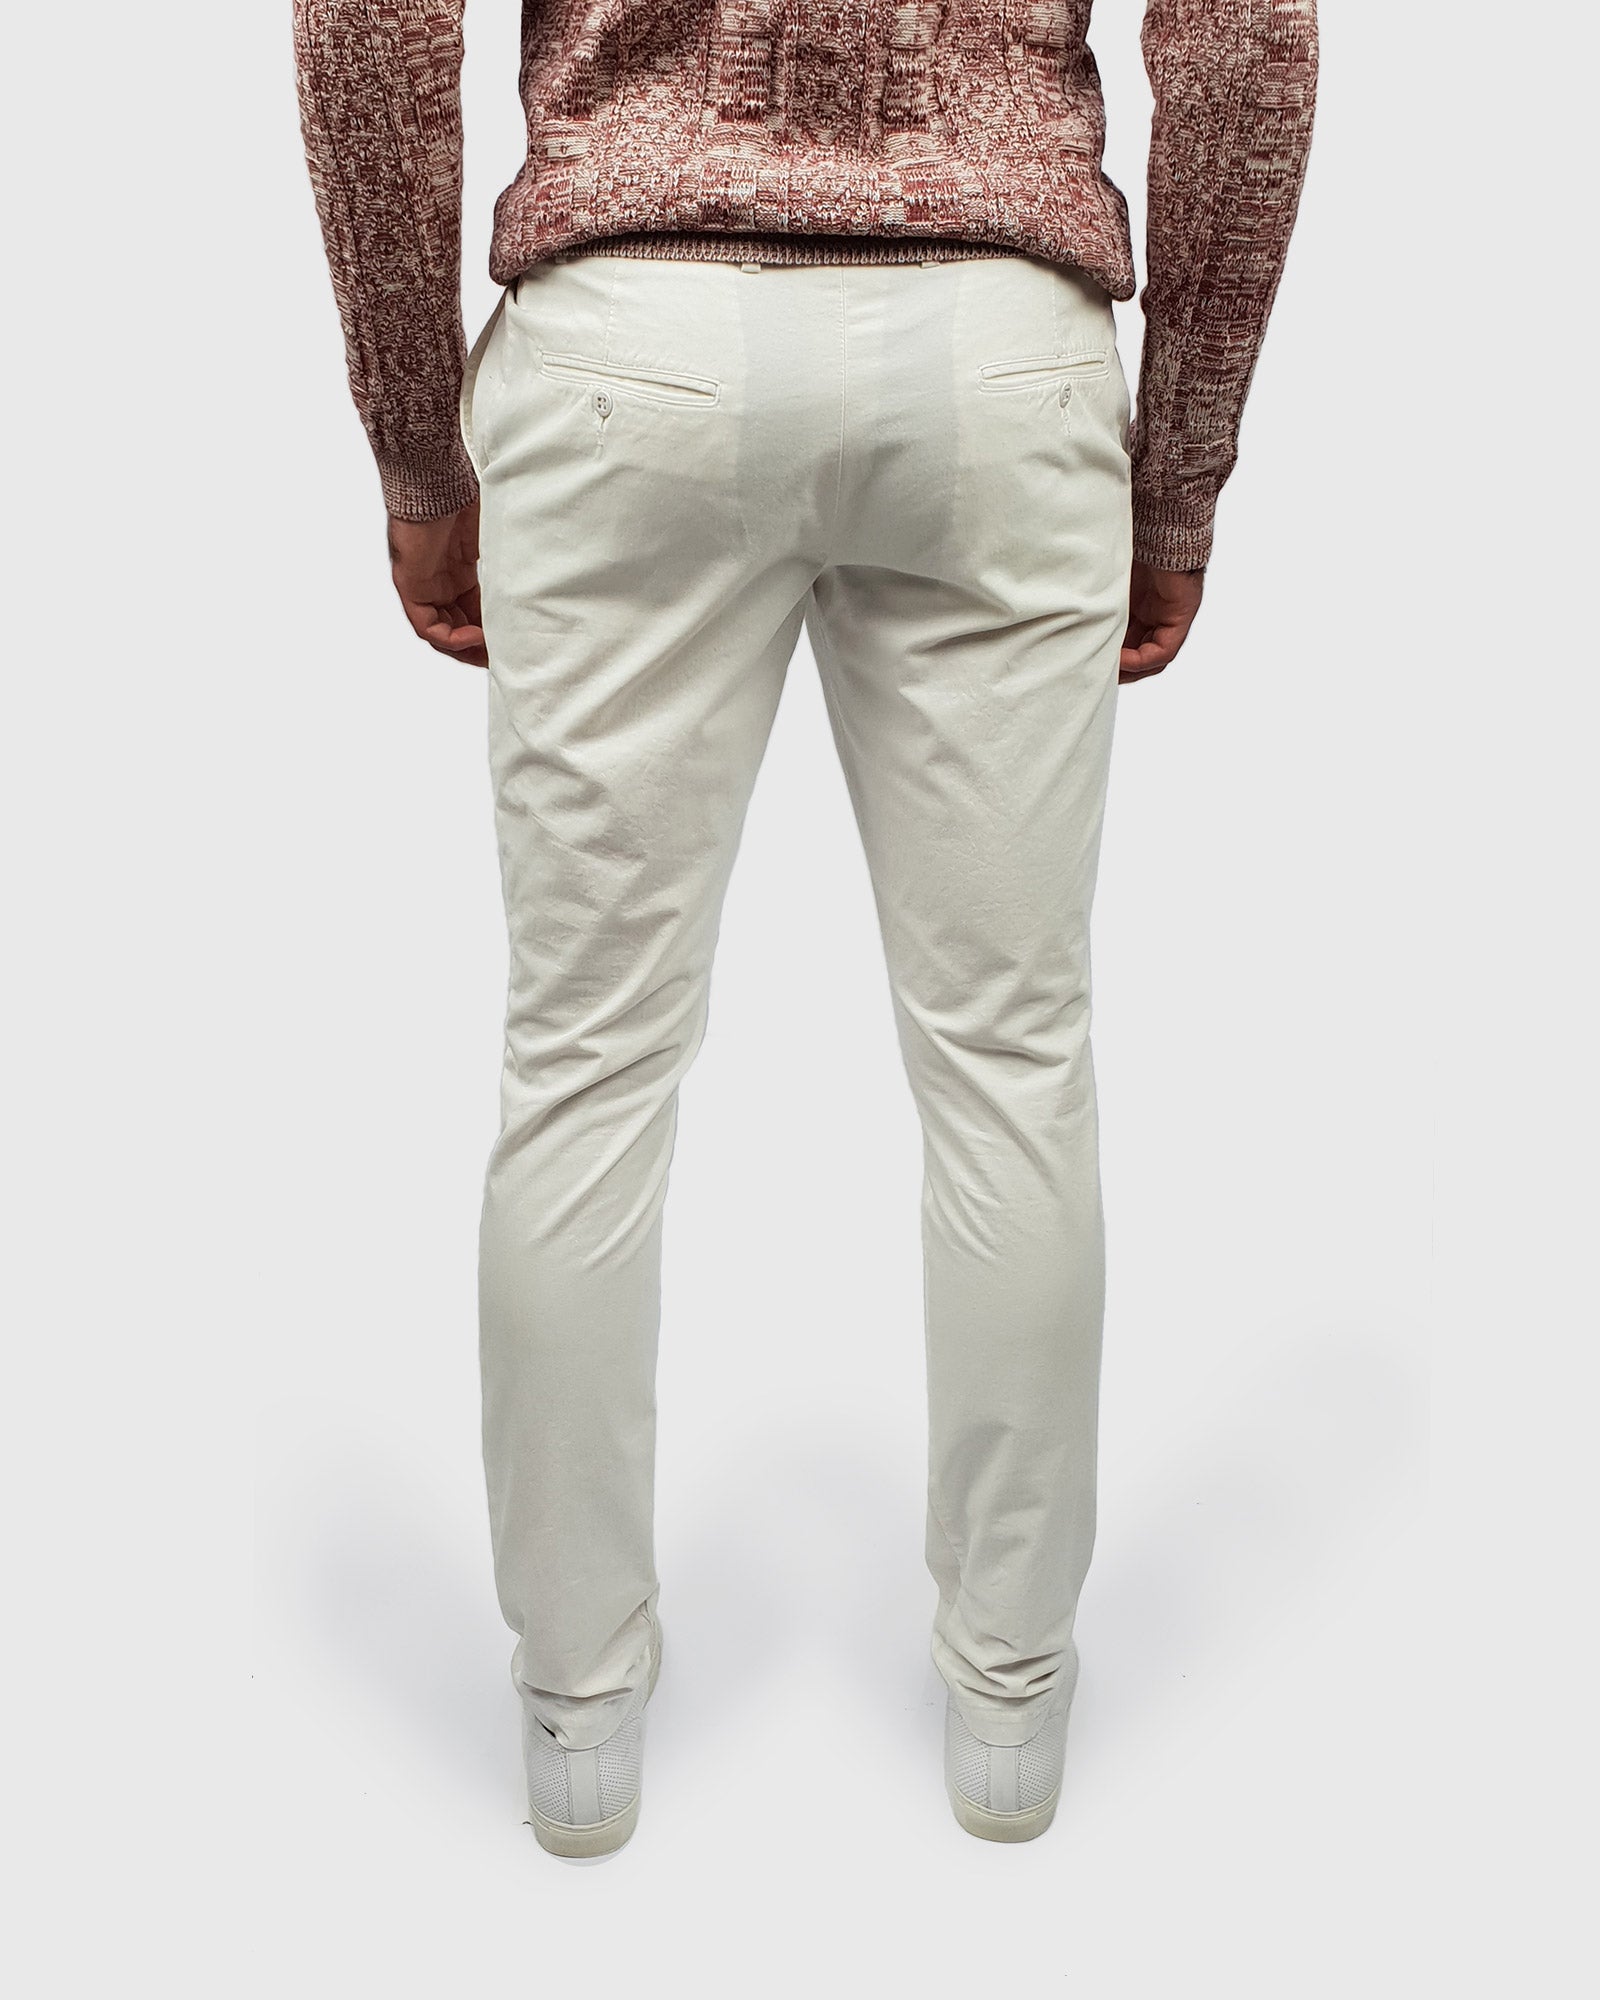 VINCENT & FRANKS S197558GD WHITE STRETCH CHINOS